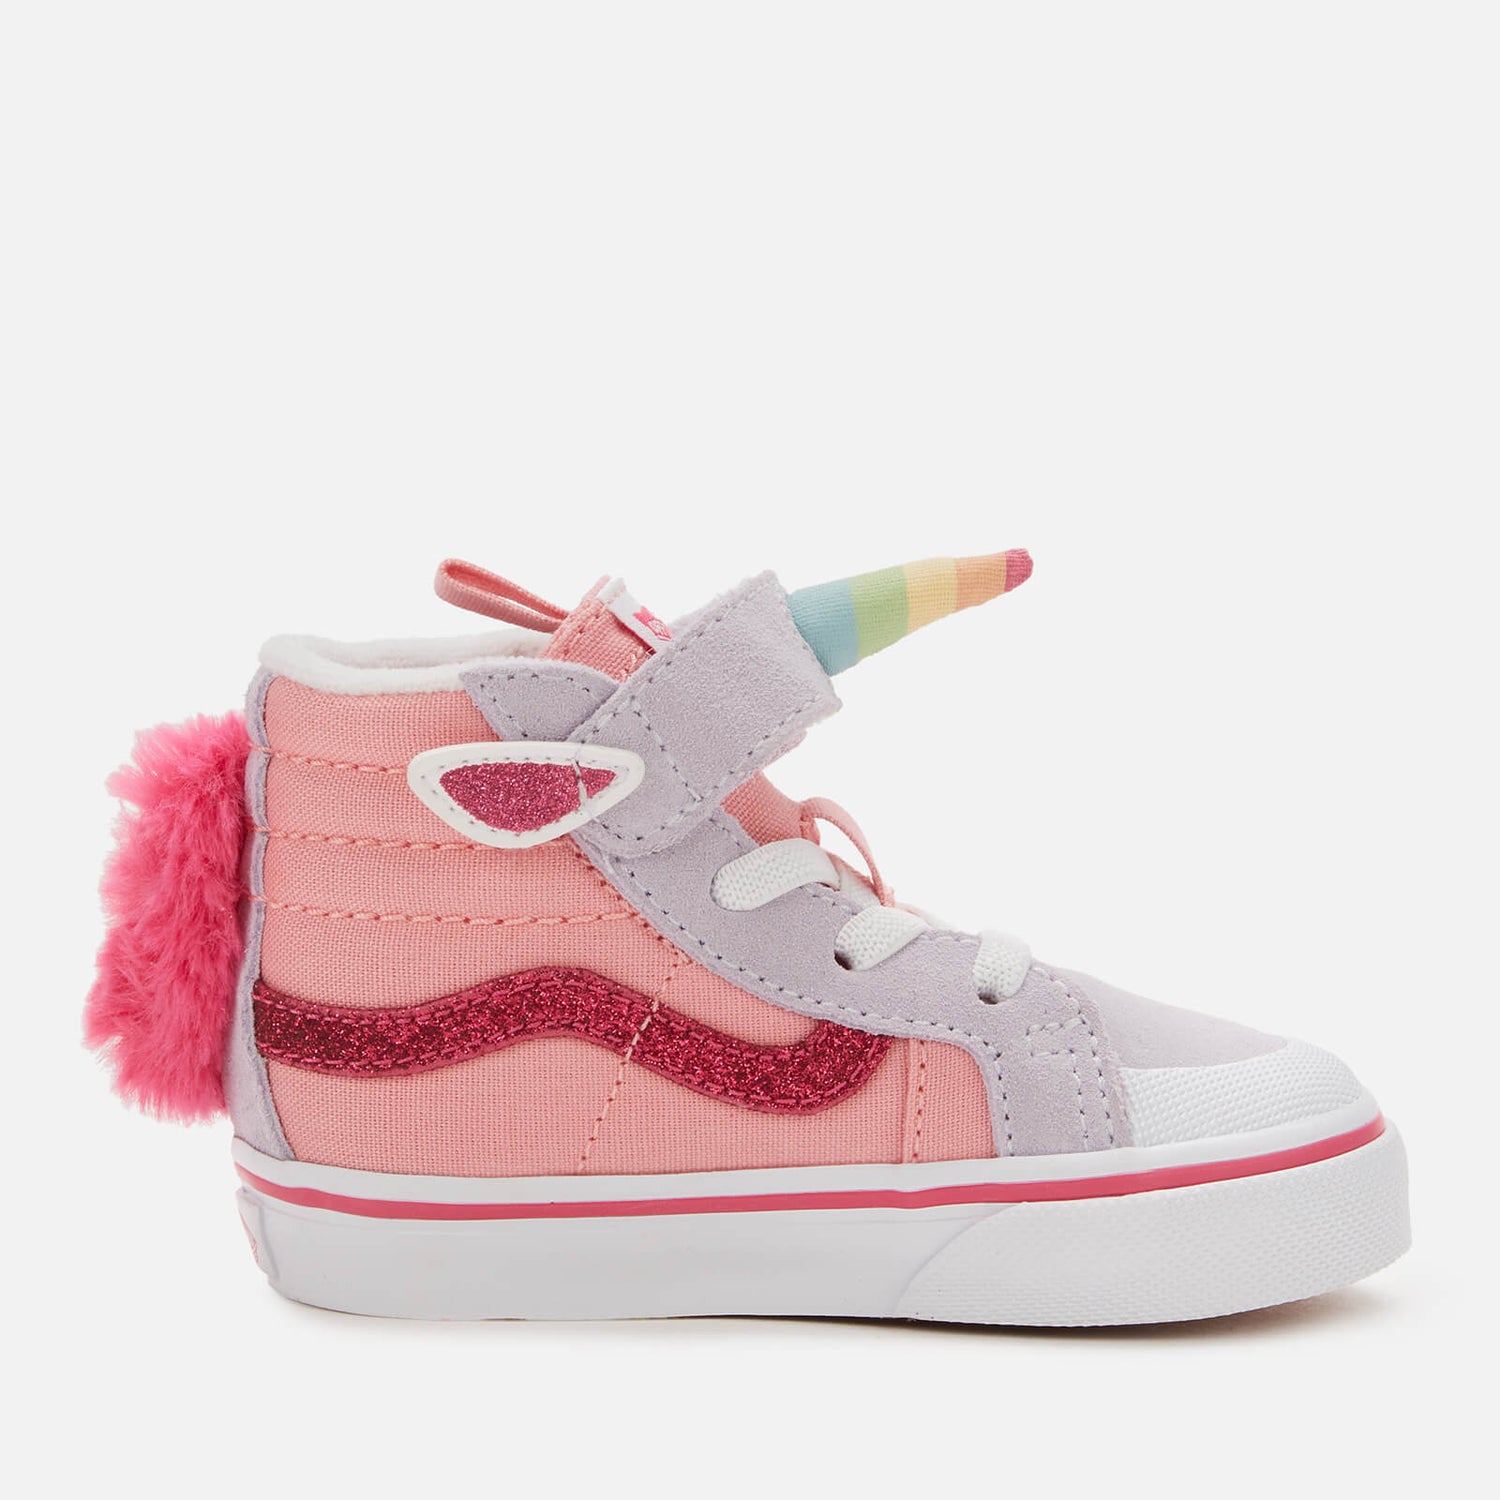 Vans Toddler's Unicorn Sk8-Hi Reissue Trainers - Pink Icing